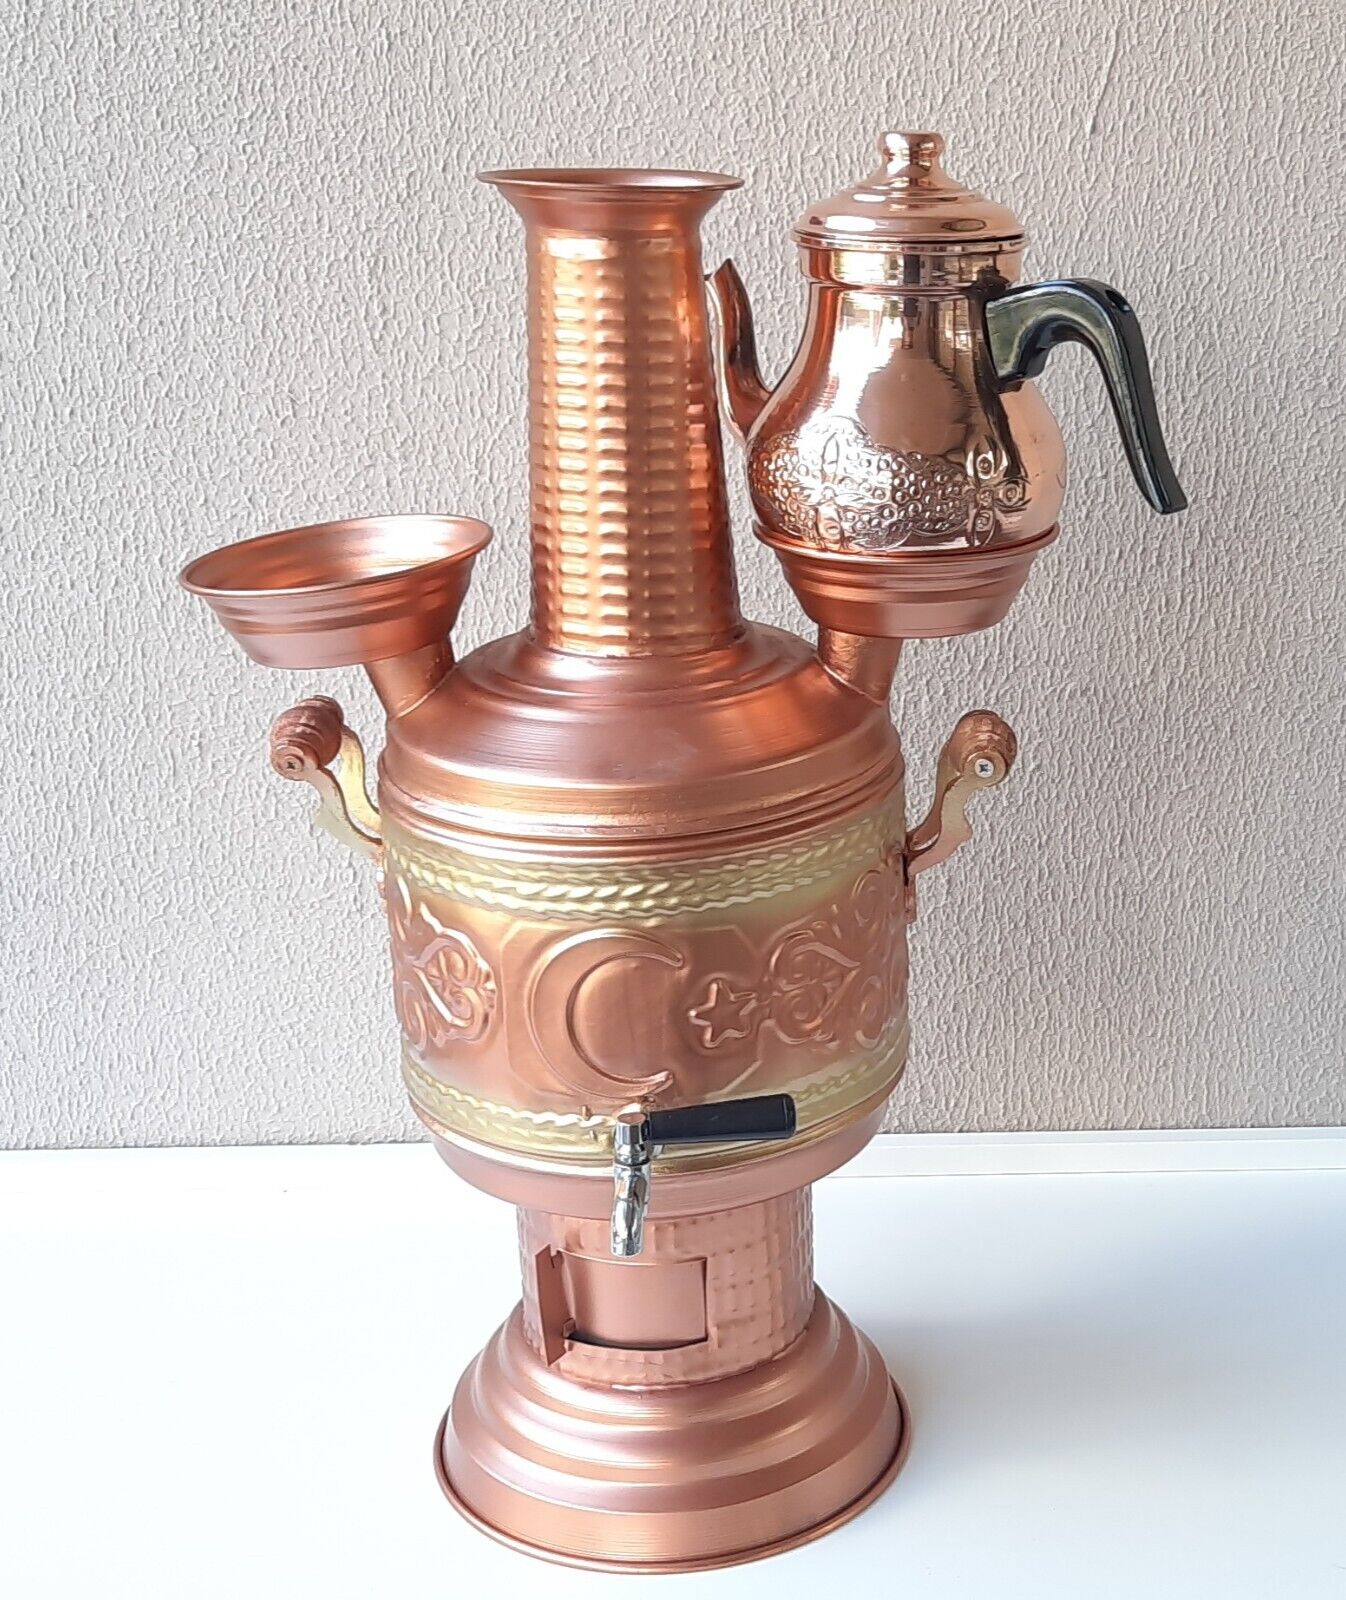 Copper Samovar, Tea Urn Kettle, Water Heater with Charcoal Wood, Tent Stove 5lt